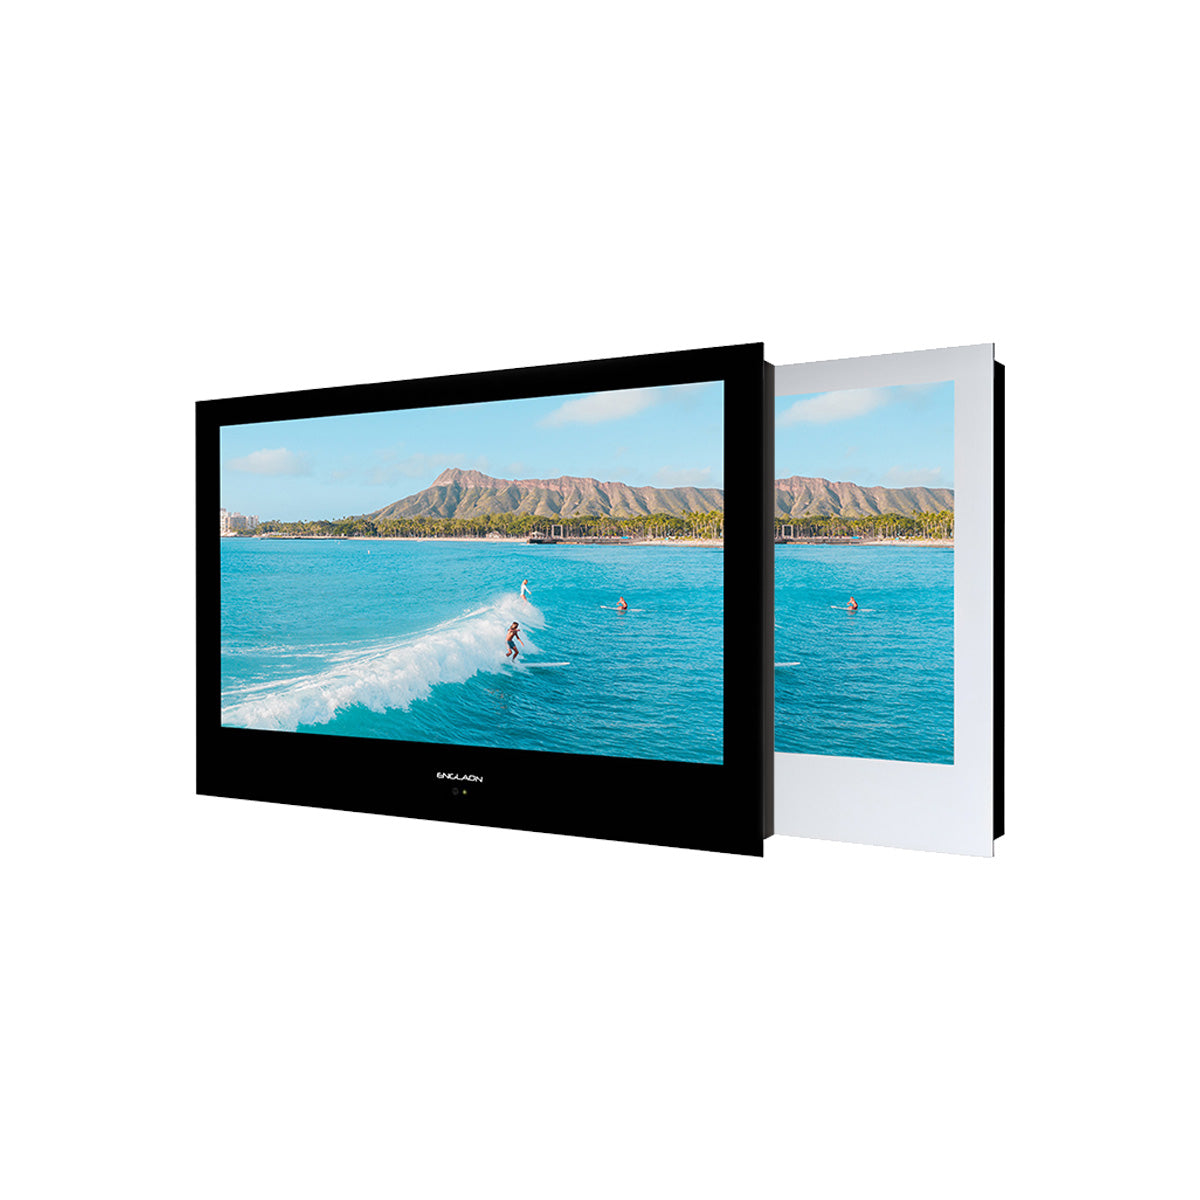 ENGLAON 32″ Full HD SMART Waterproof LED TV for Bathroom, Kitchen and Spa